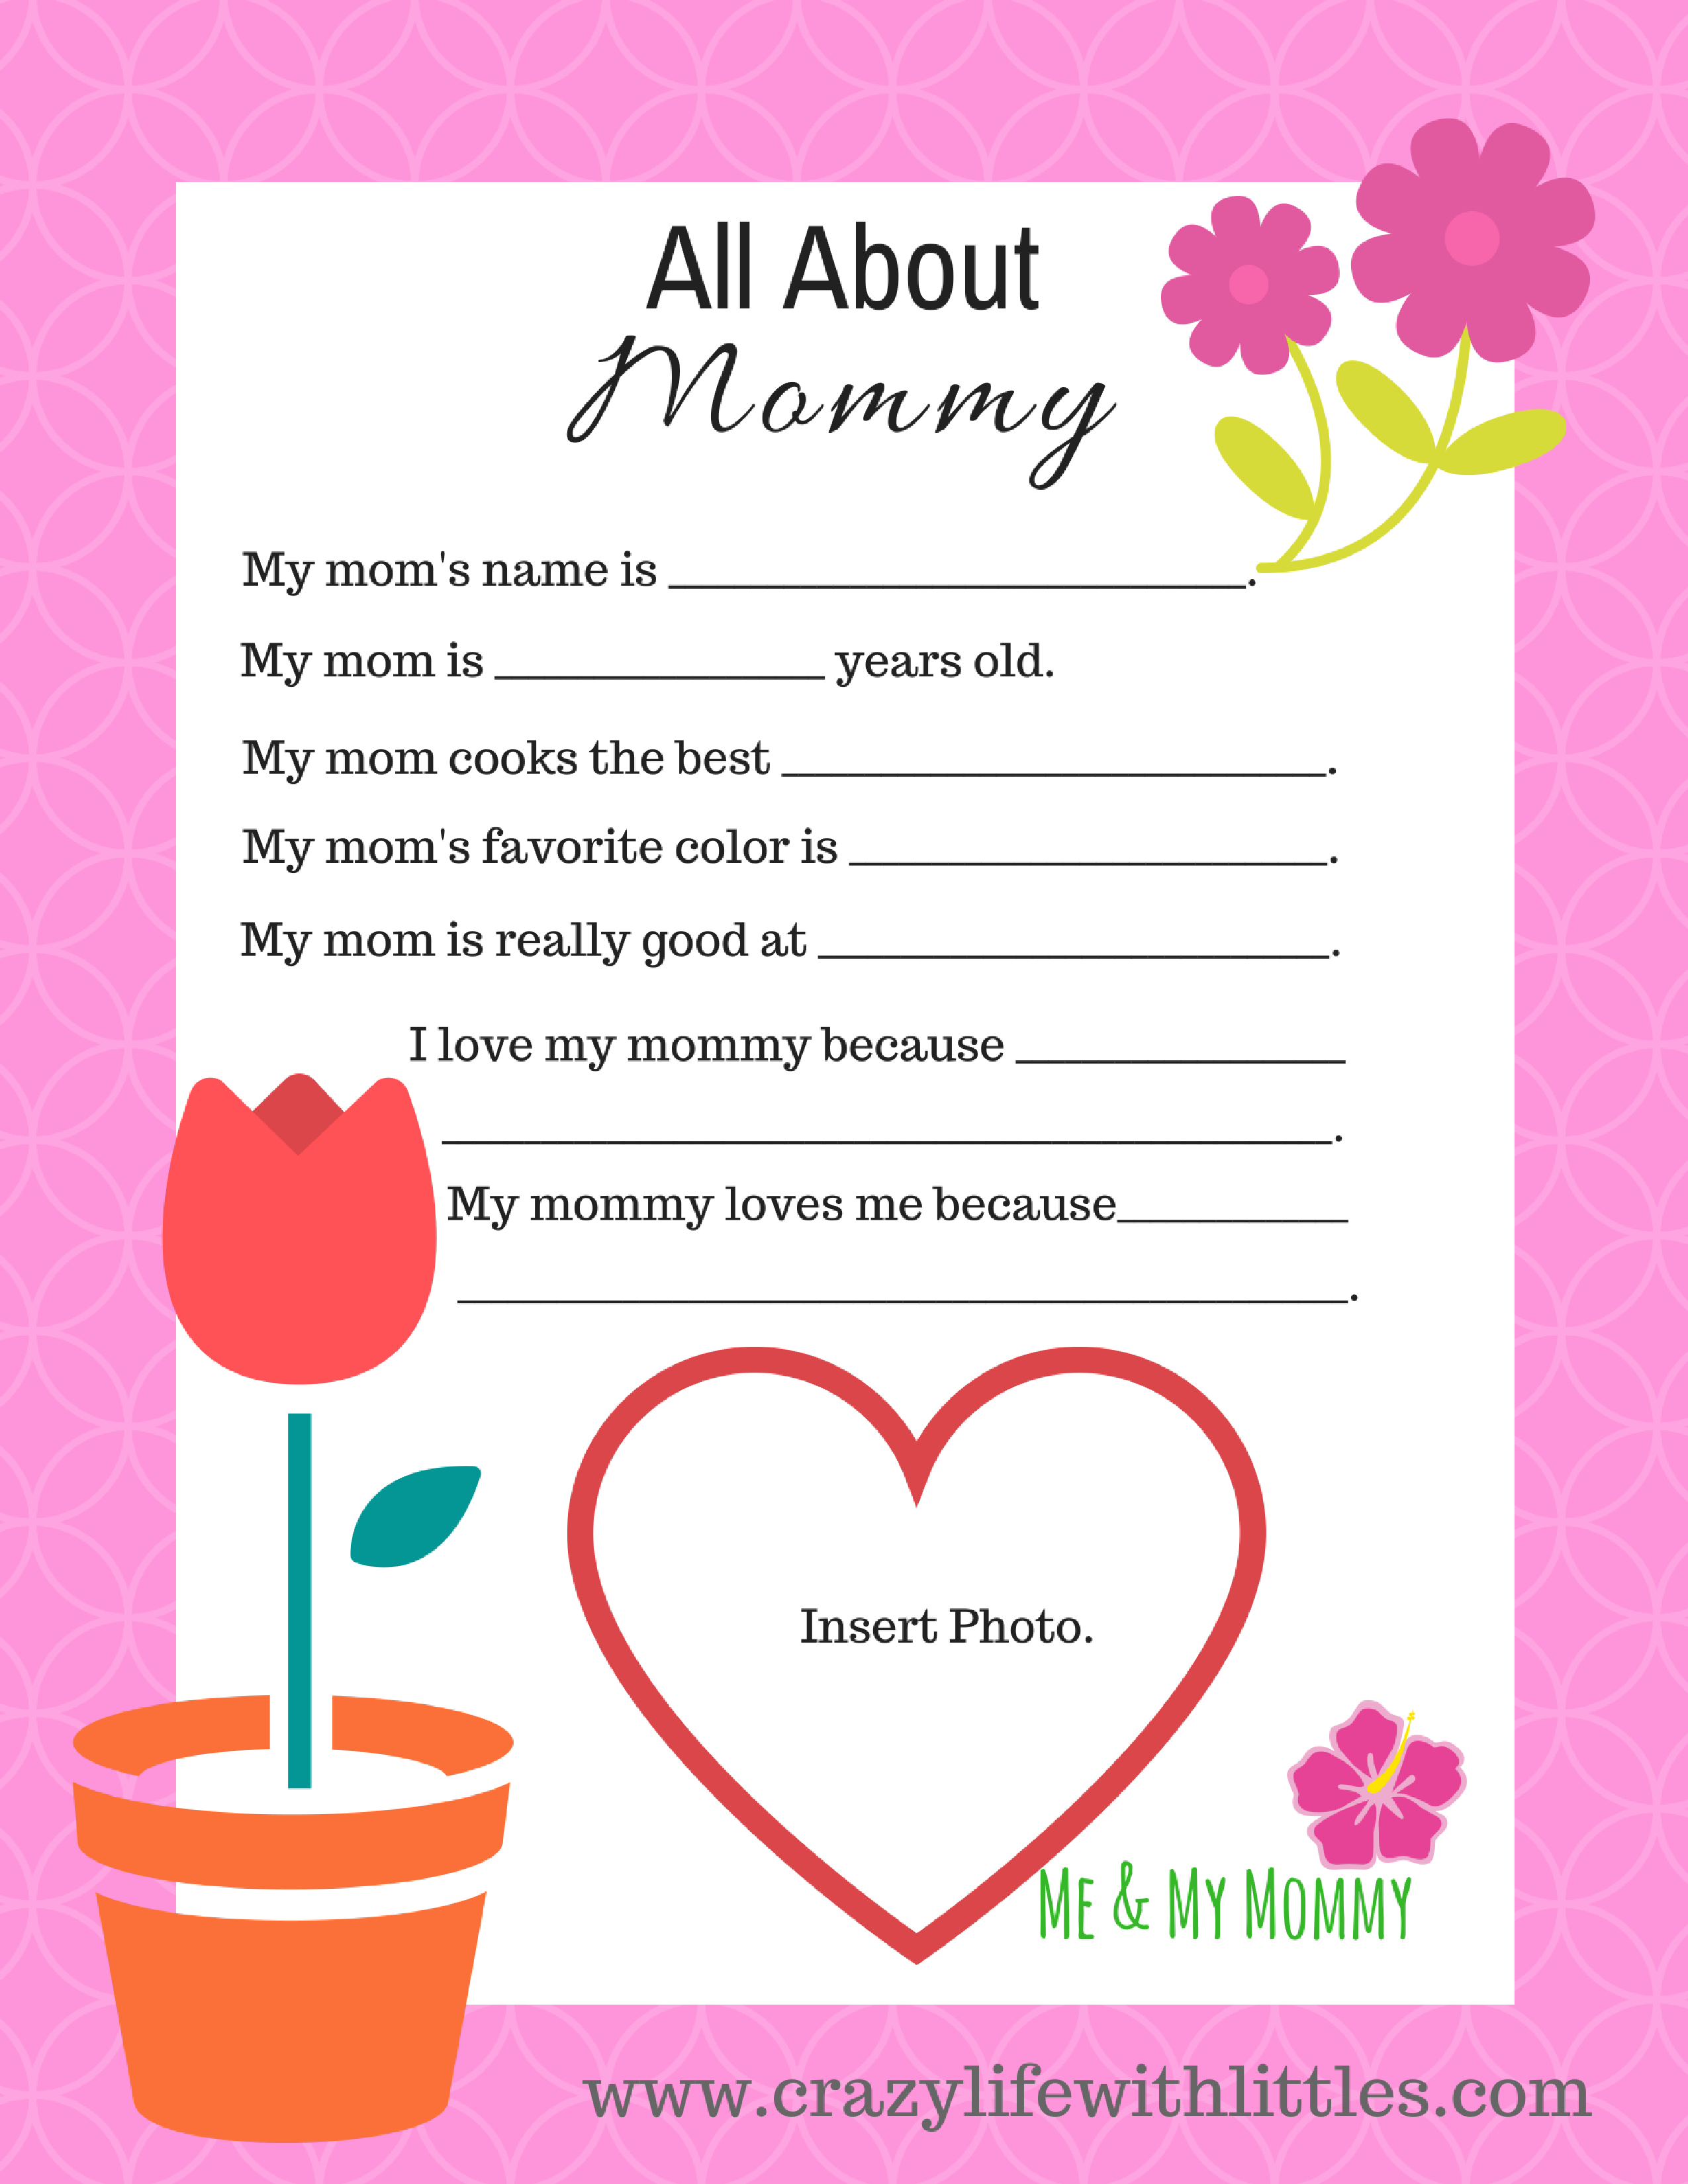 free-mother-s-day-printable-from-toddlers-crazy-life-with-littles